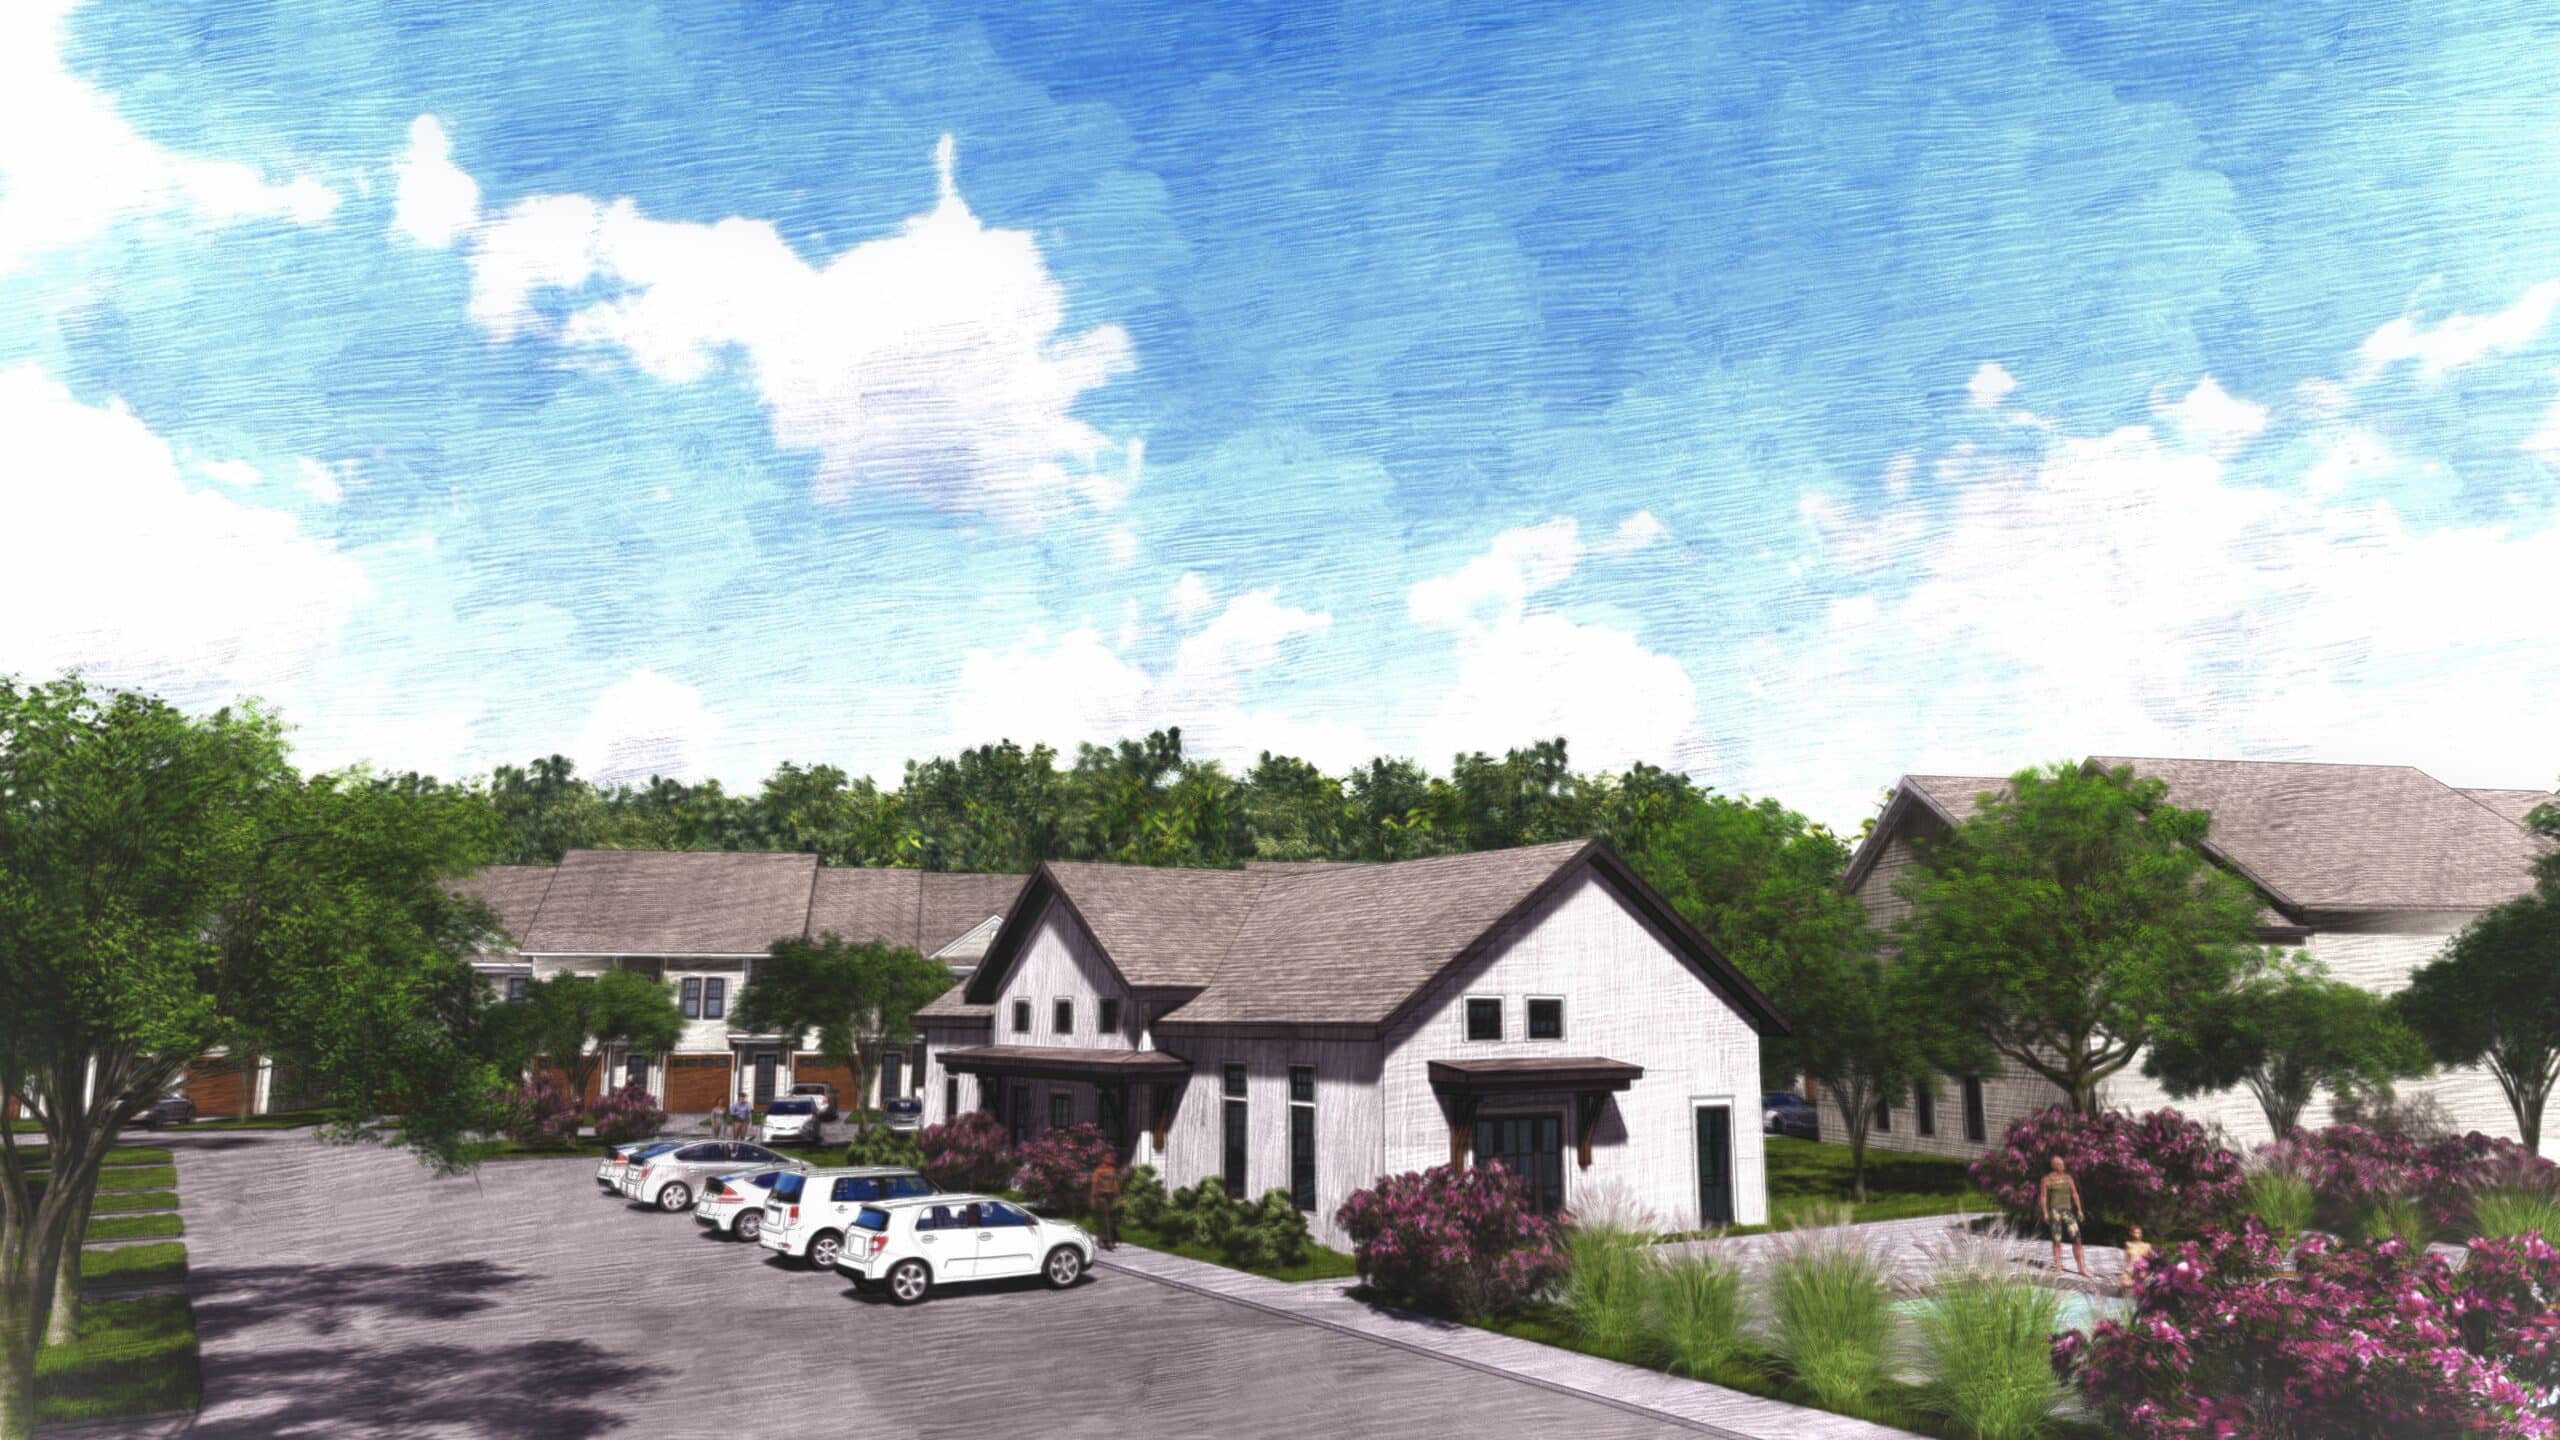 2022.02.04 - HICKORY TOWNHOMES - RENDERING 1